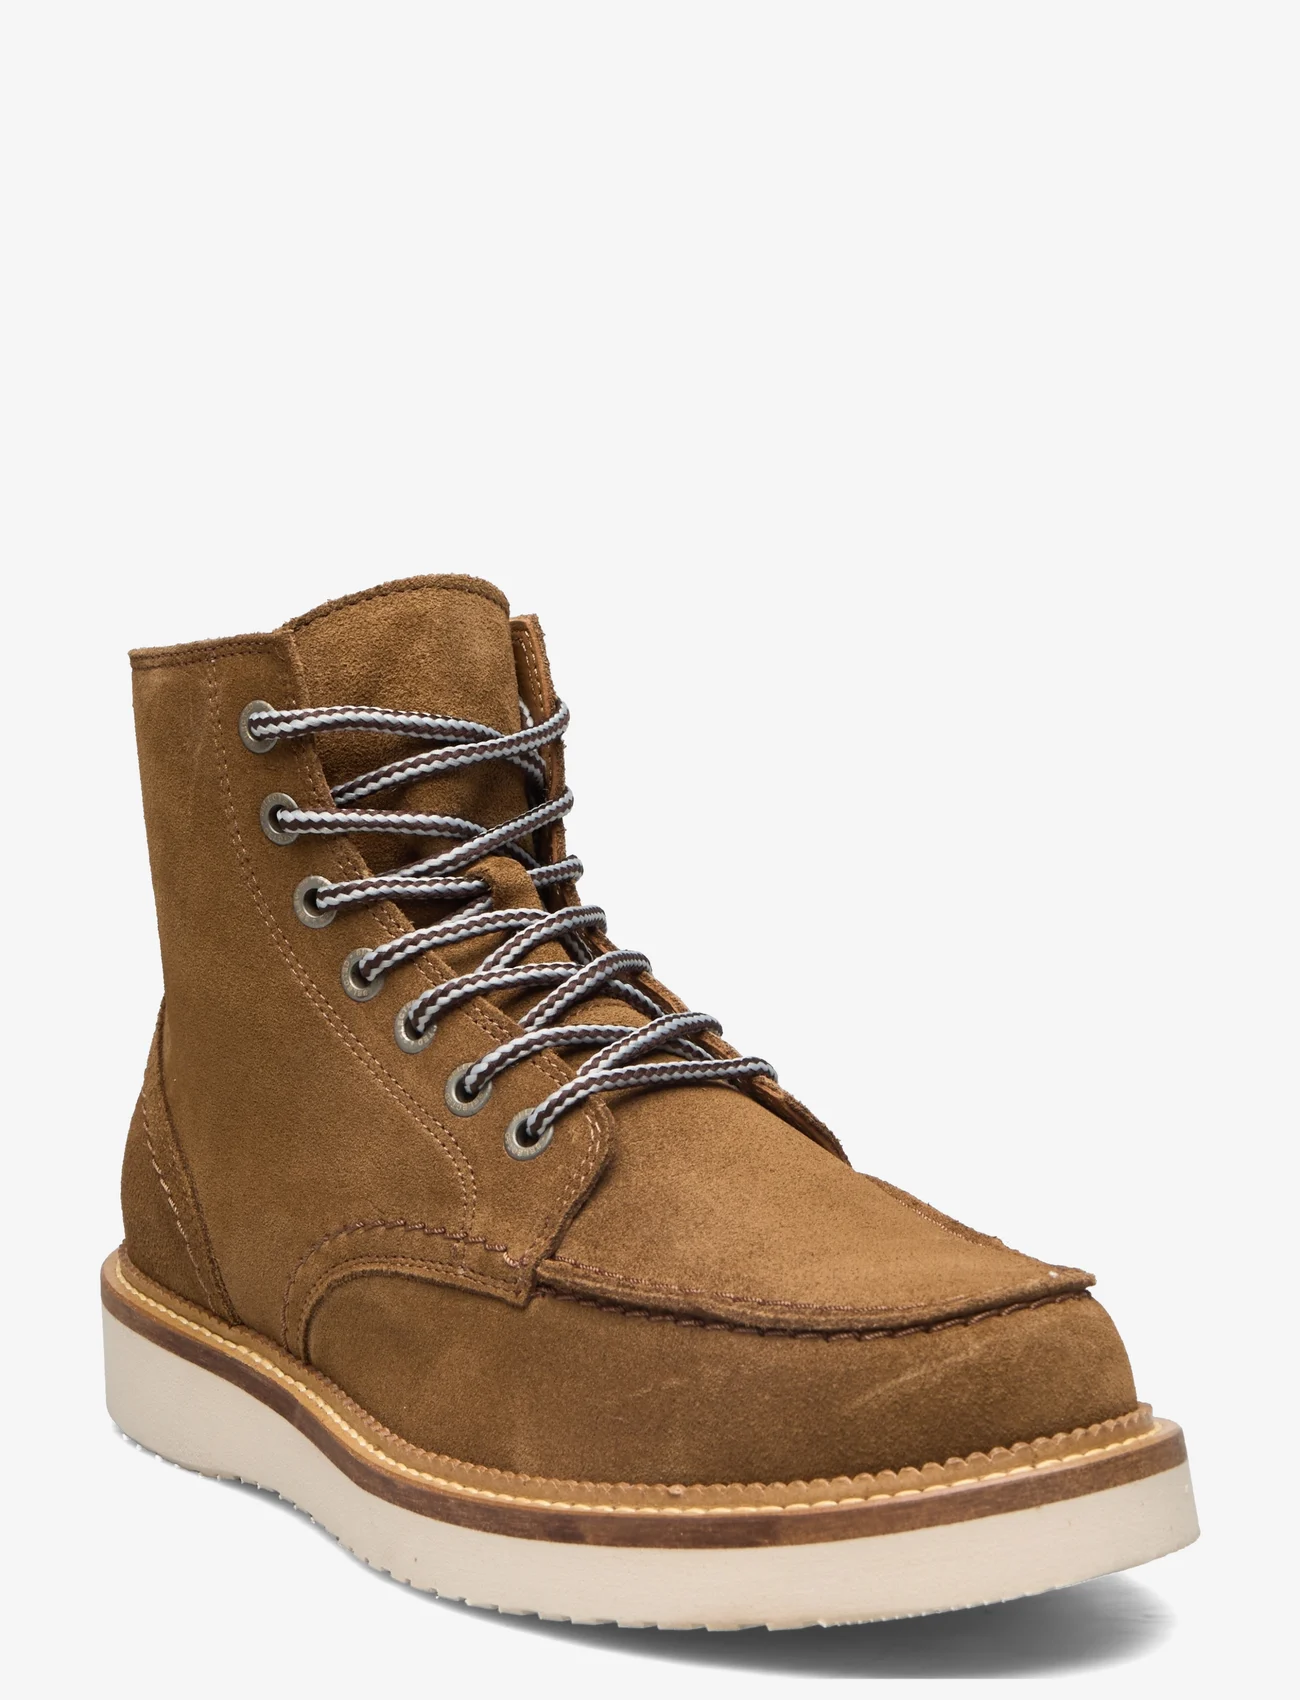 Selected Homme - SLHTEO NEW SUEDE MOC-TOE BOOT B - paeltega jalanõud - tobacco brown - 0